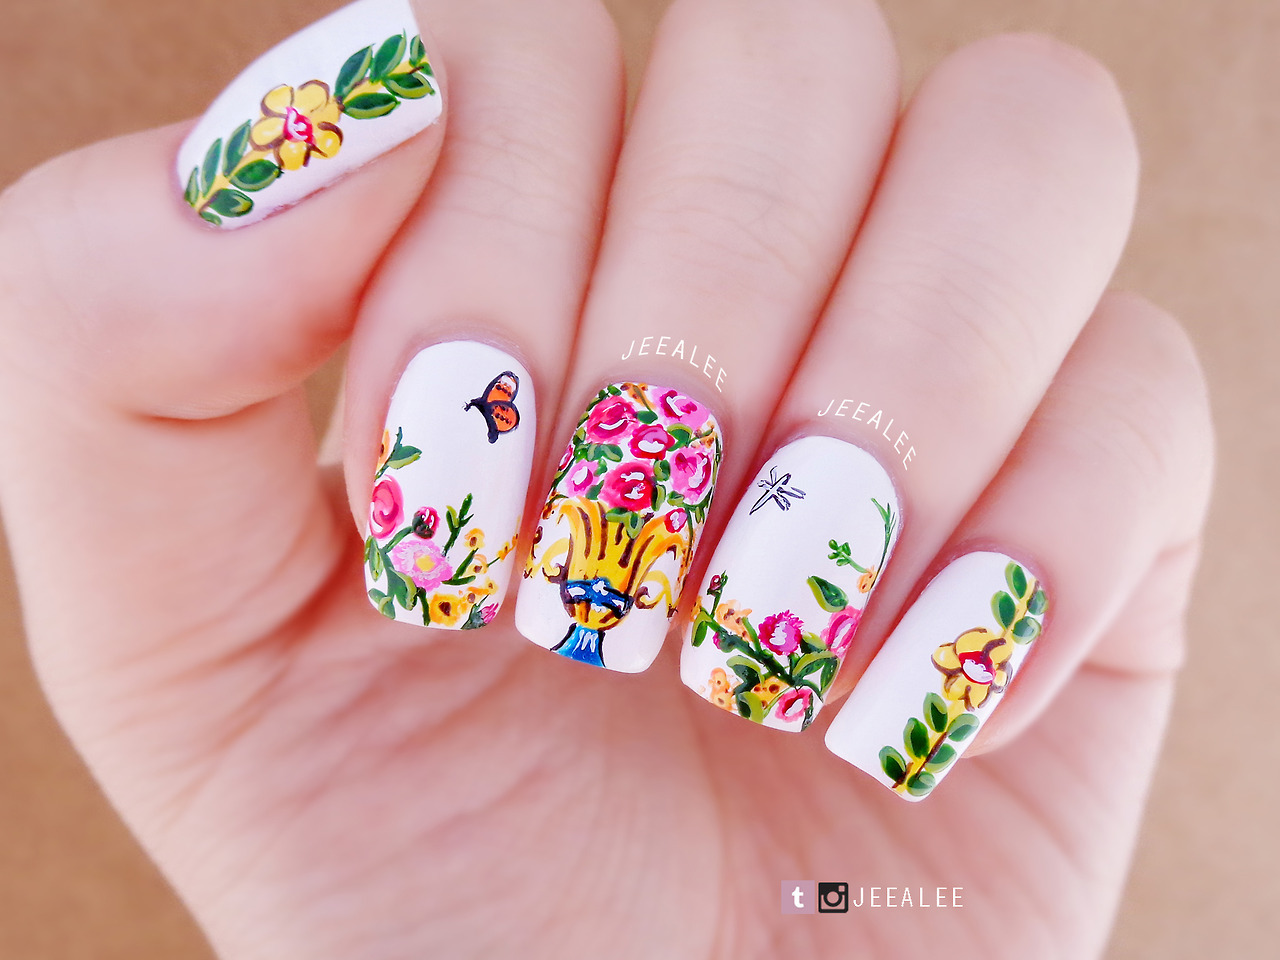 JeeA Lee's Nail Art — Floral Nails inspired by Dolce & Gabbana's...